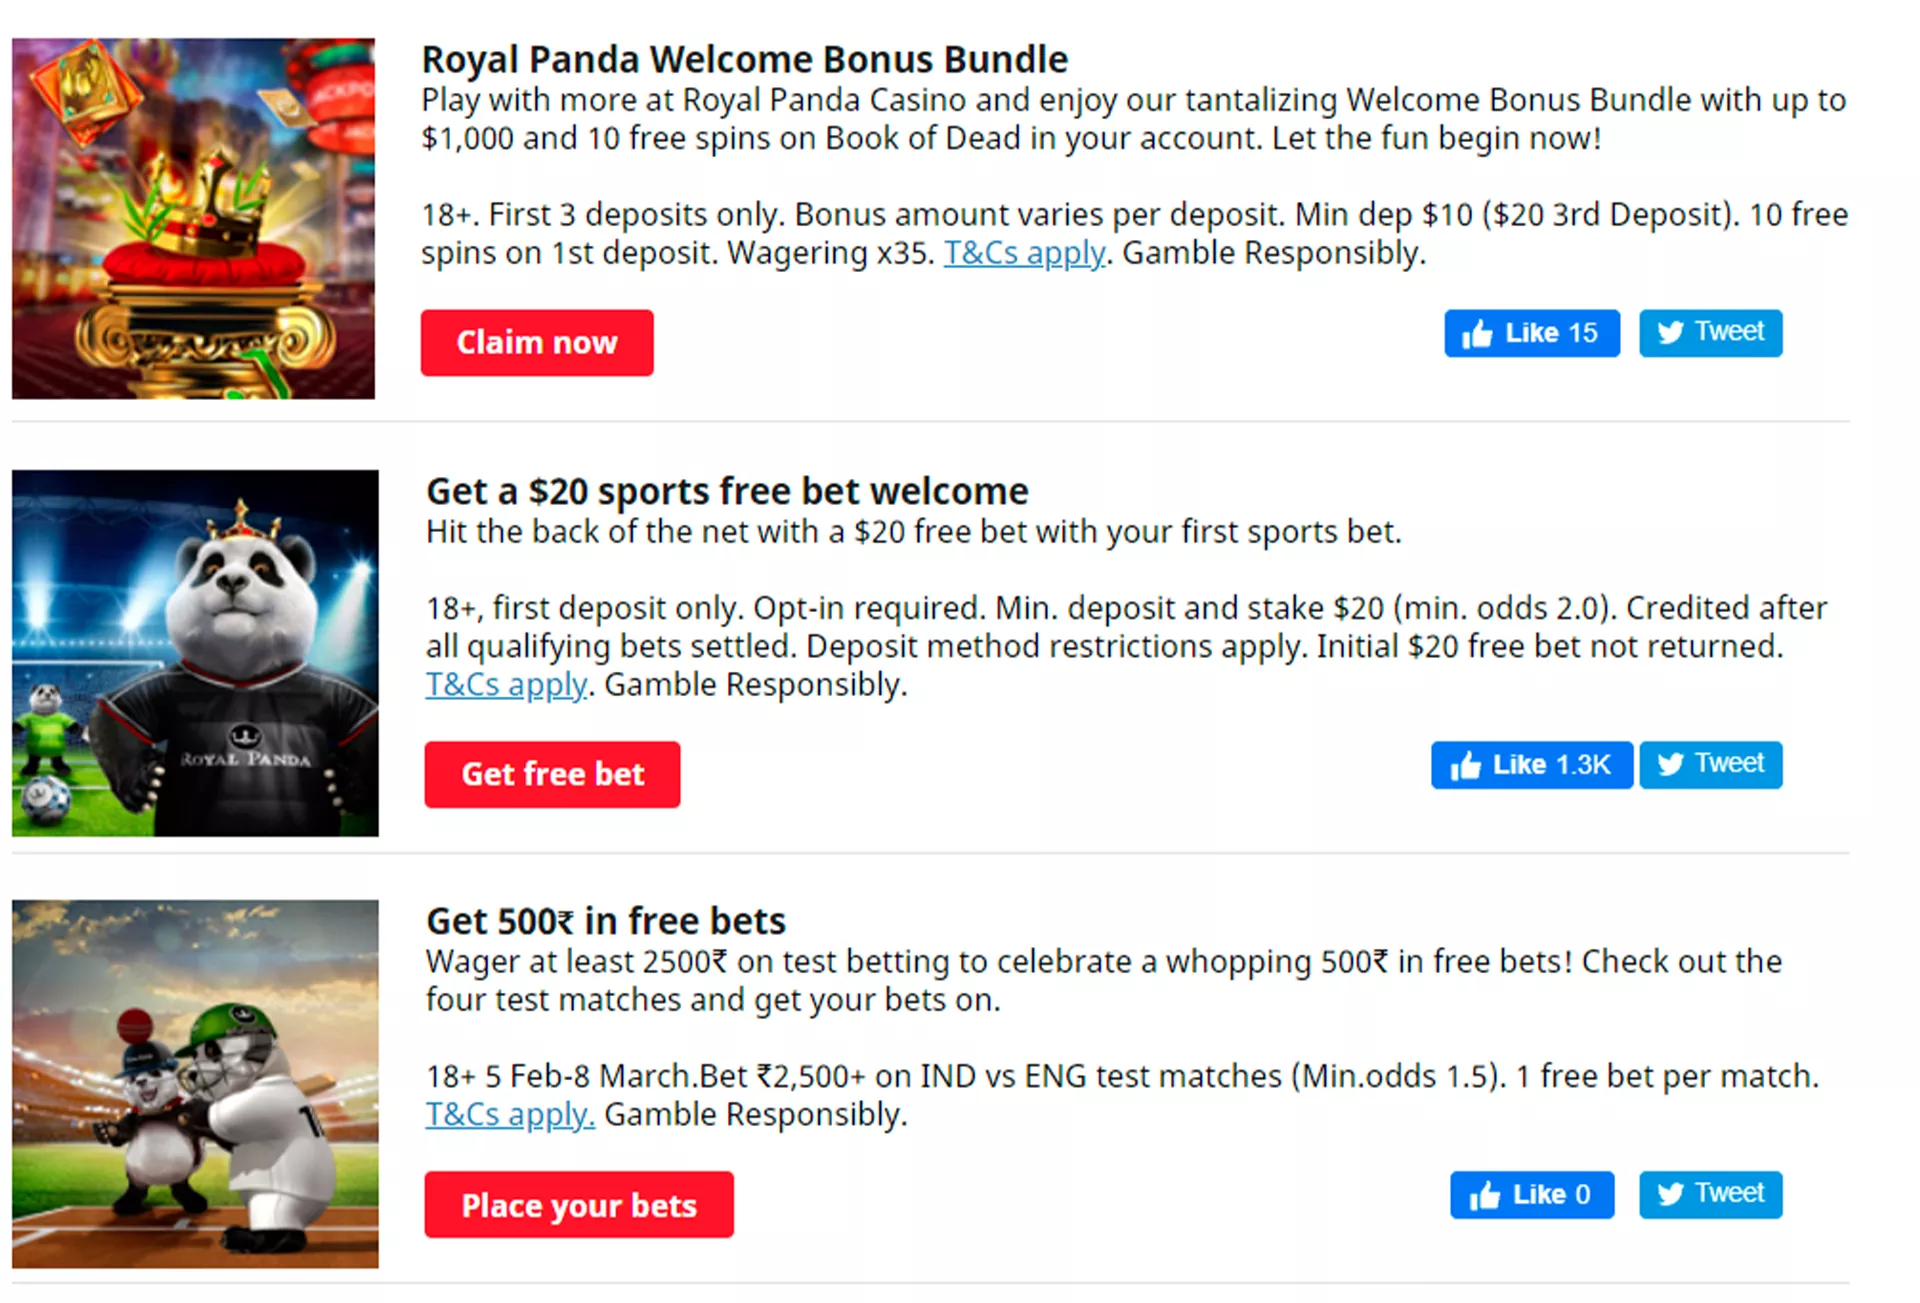 There are also a lot of other promotions that Royal Panda offers for regular bettors.